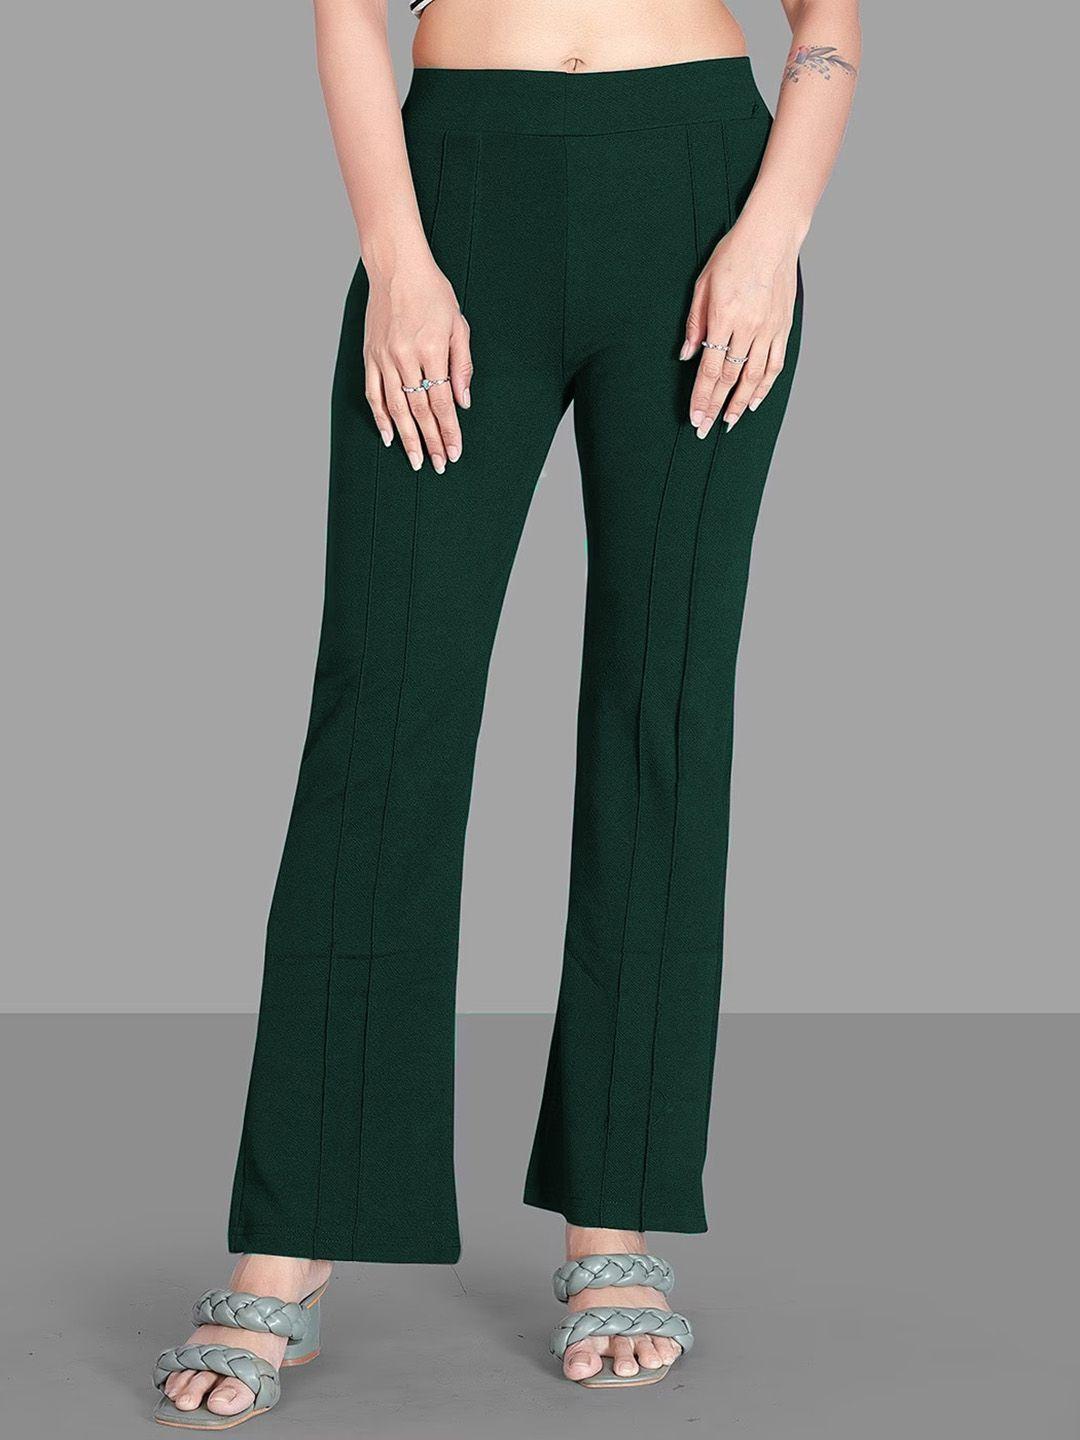 clafoutis-women-flared-high-rise-stretchable-bootcut-trousers